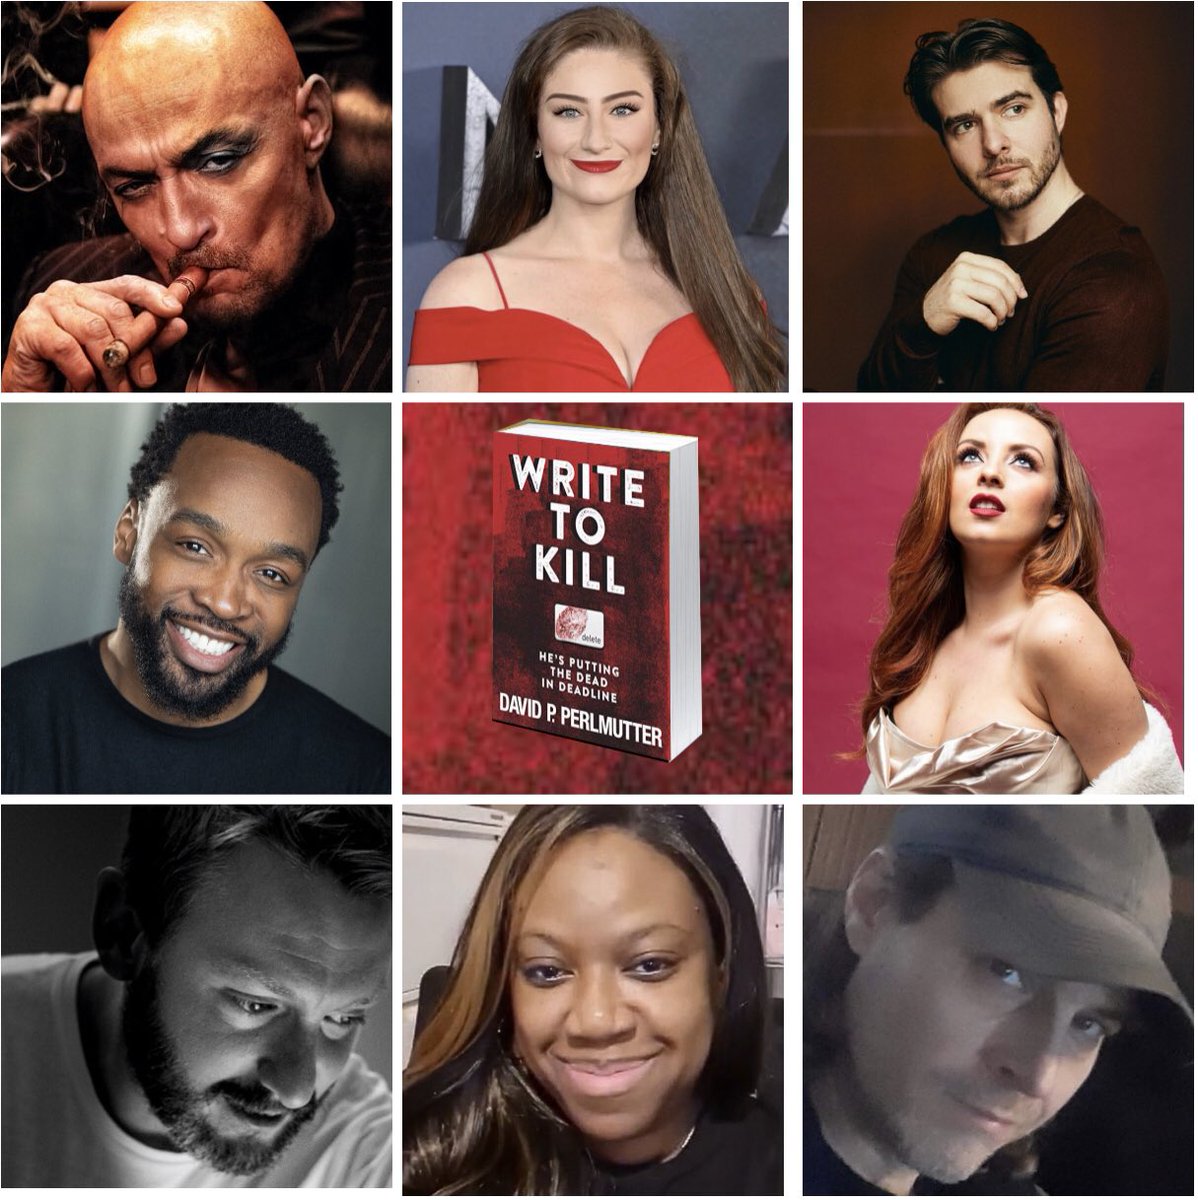 @AuthorStanleyC To coincide with the launch of the @Kickstarter kickstarter.com/projects/david… funding campaign to make a #TVPilot with this talented cast and crew (FANTASTIC rewards to be involved), #WriteToKill with over 700 pages is #FREE to #download NOW and over the #bankholidayweekend, Amazon 🔗…